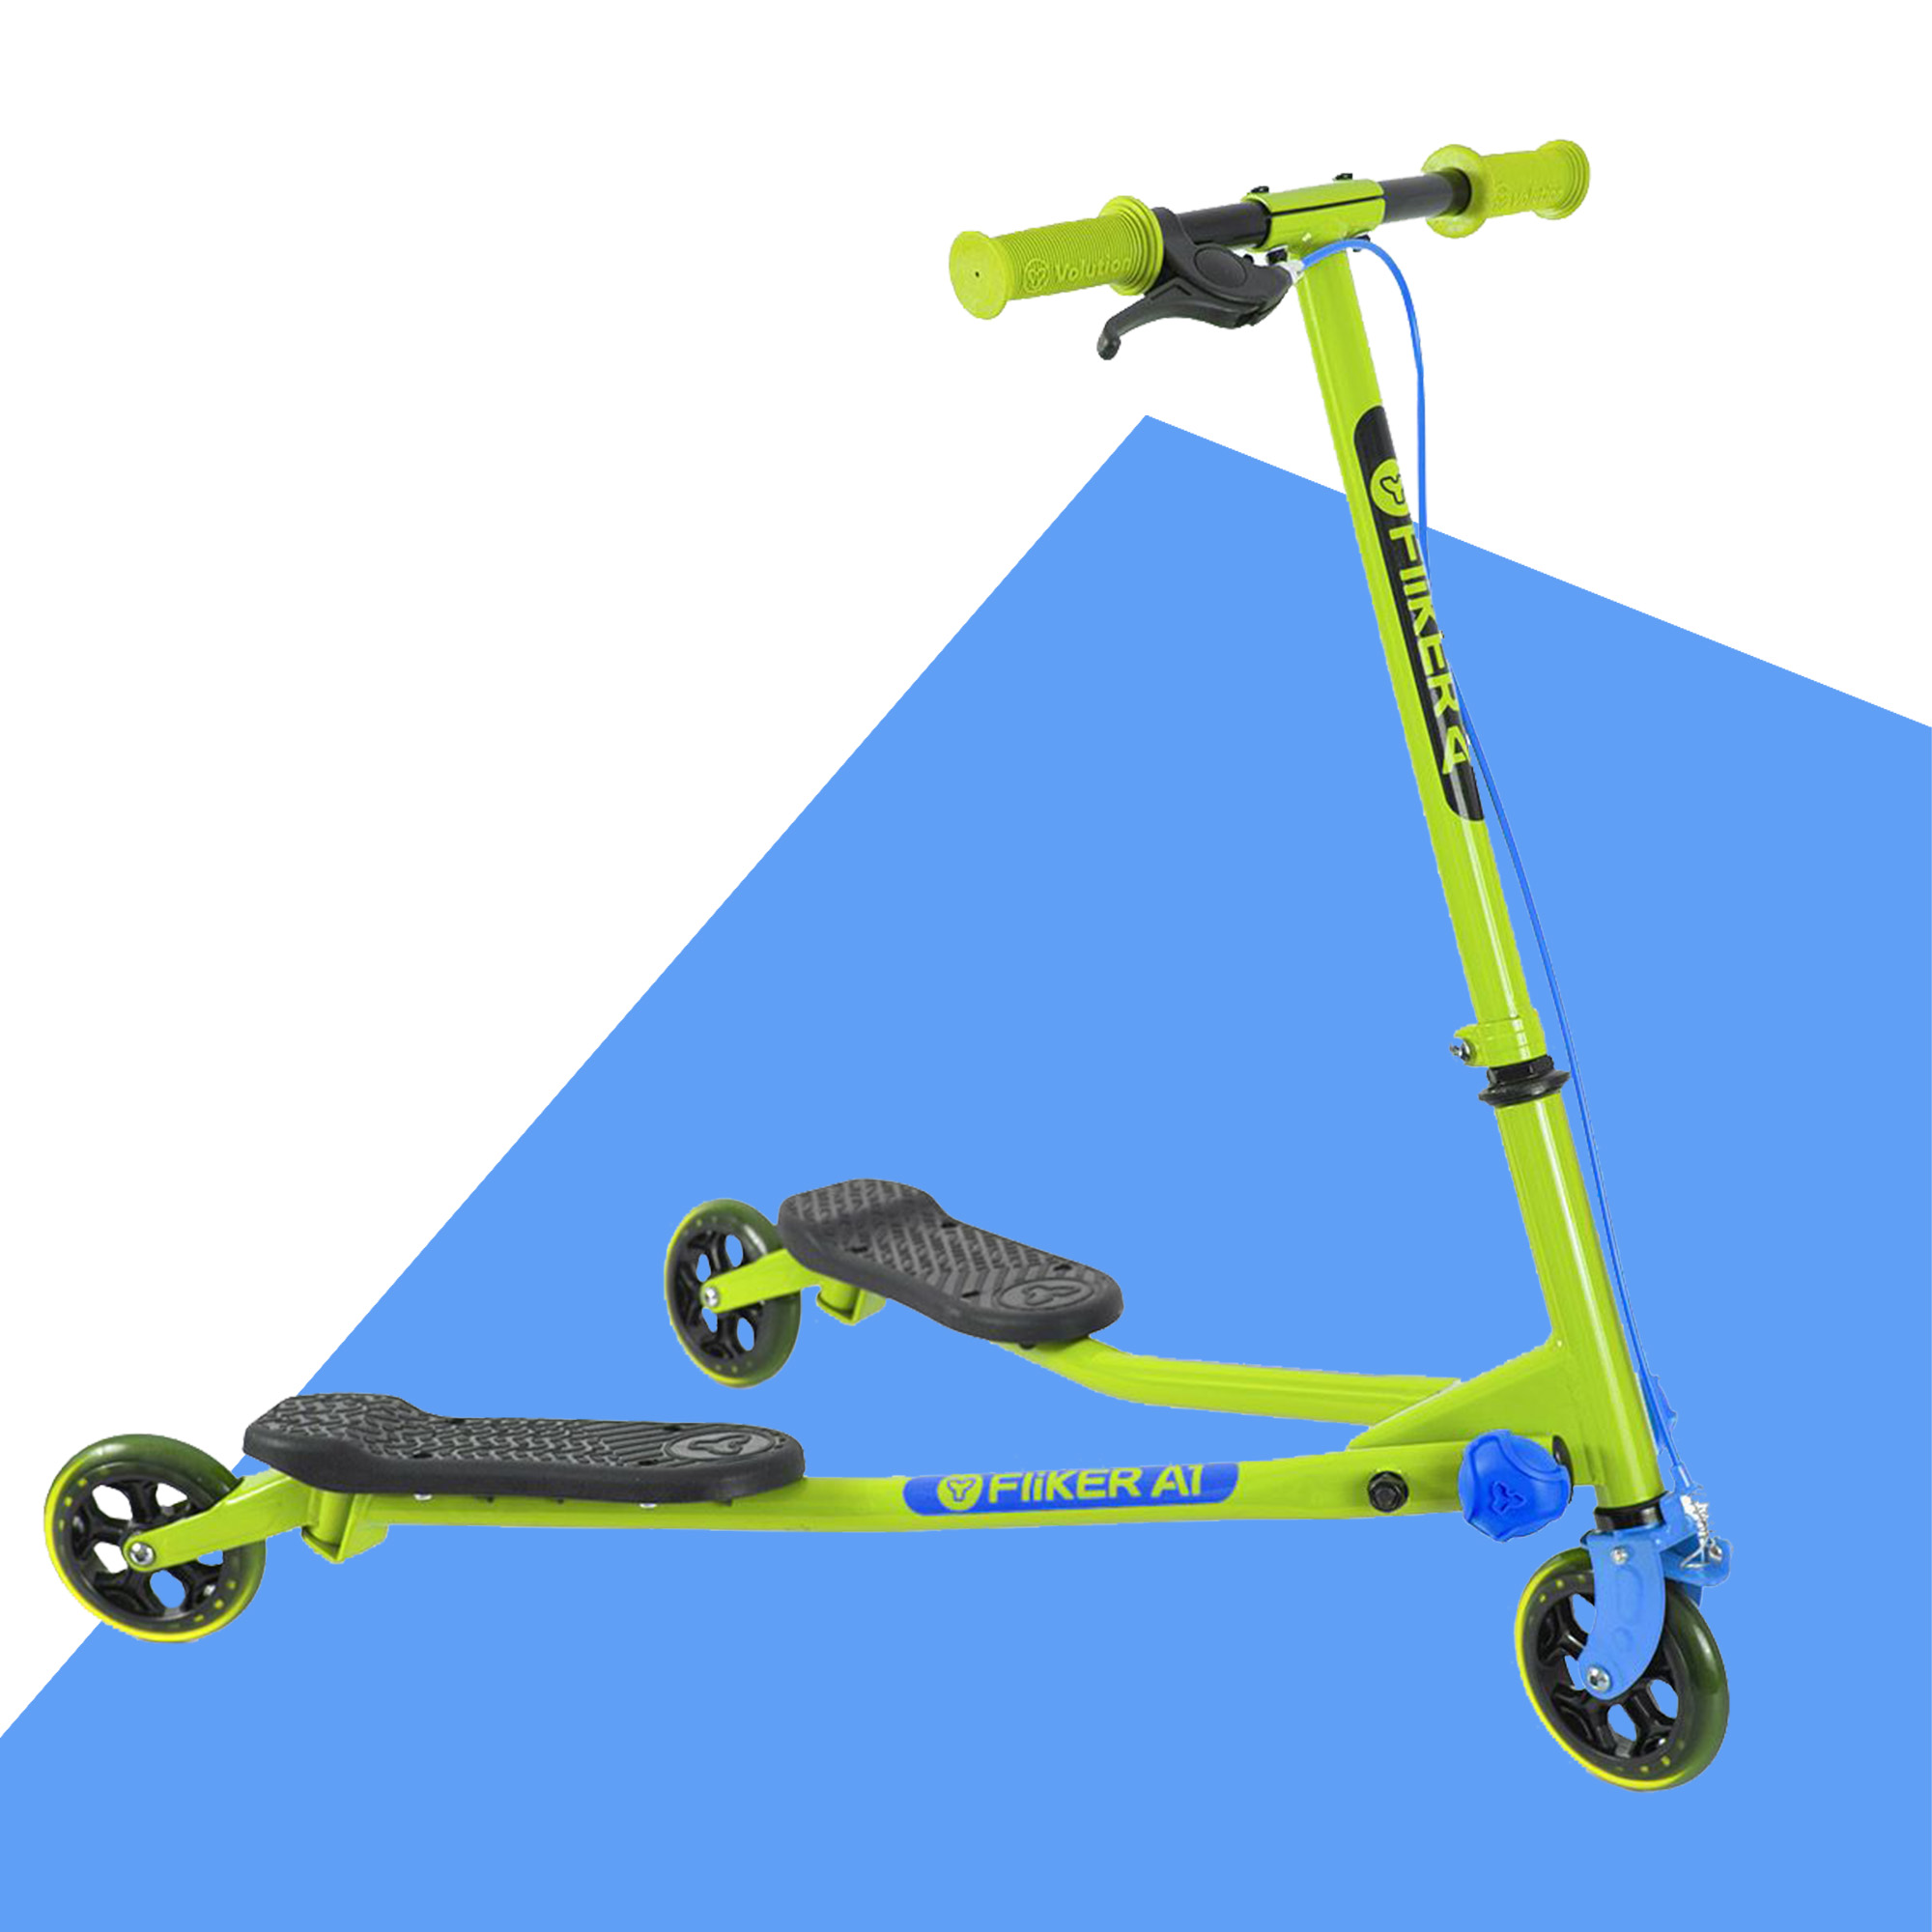 Yvolution Y Fliker Air A1 | 3 Wheel Drift Scooter for Kids Child 5-8 Years Old (Green) Unisex - image 3 of 7